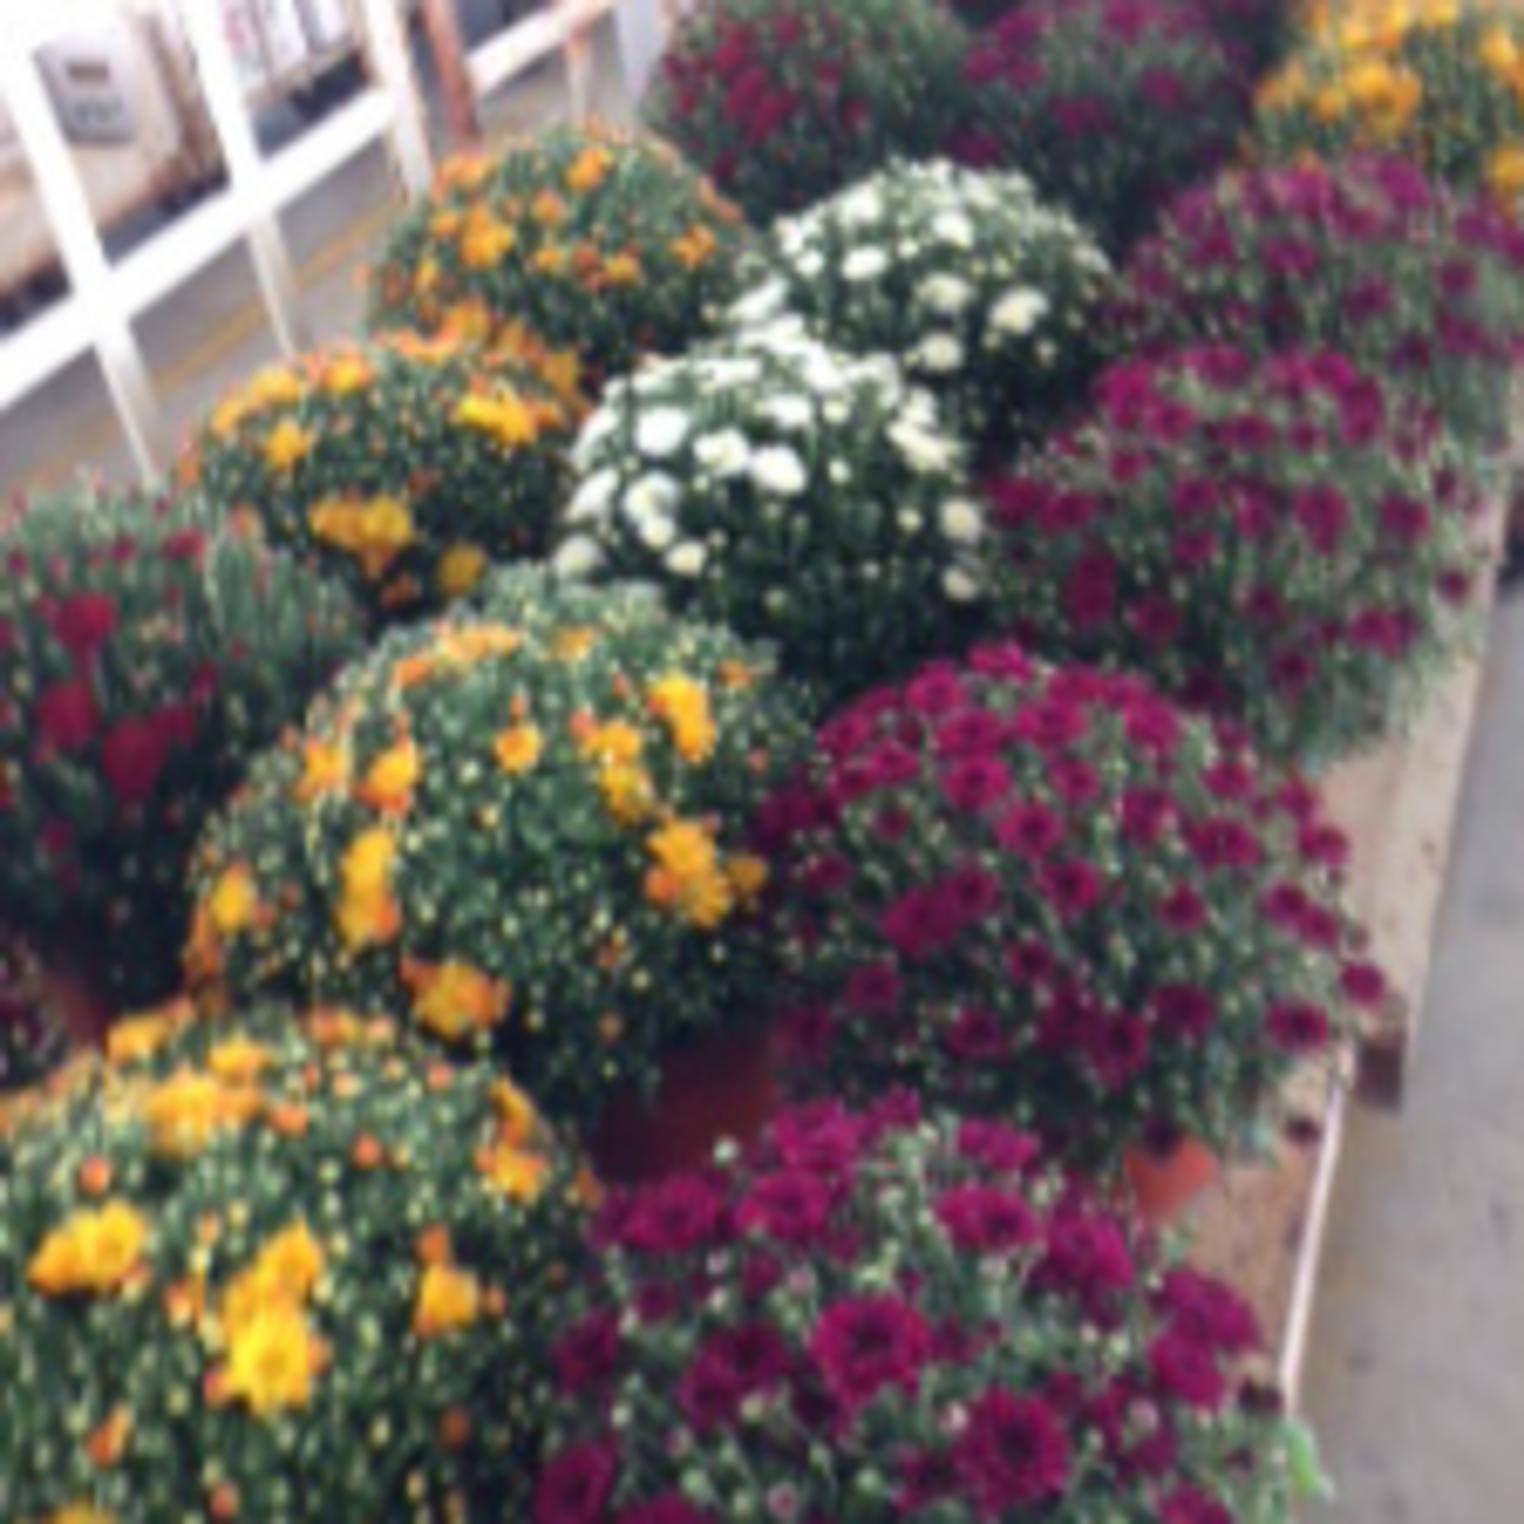 Mums at the Shippensburg Auction Center